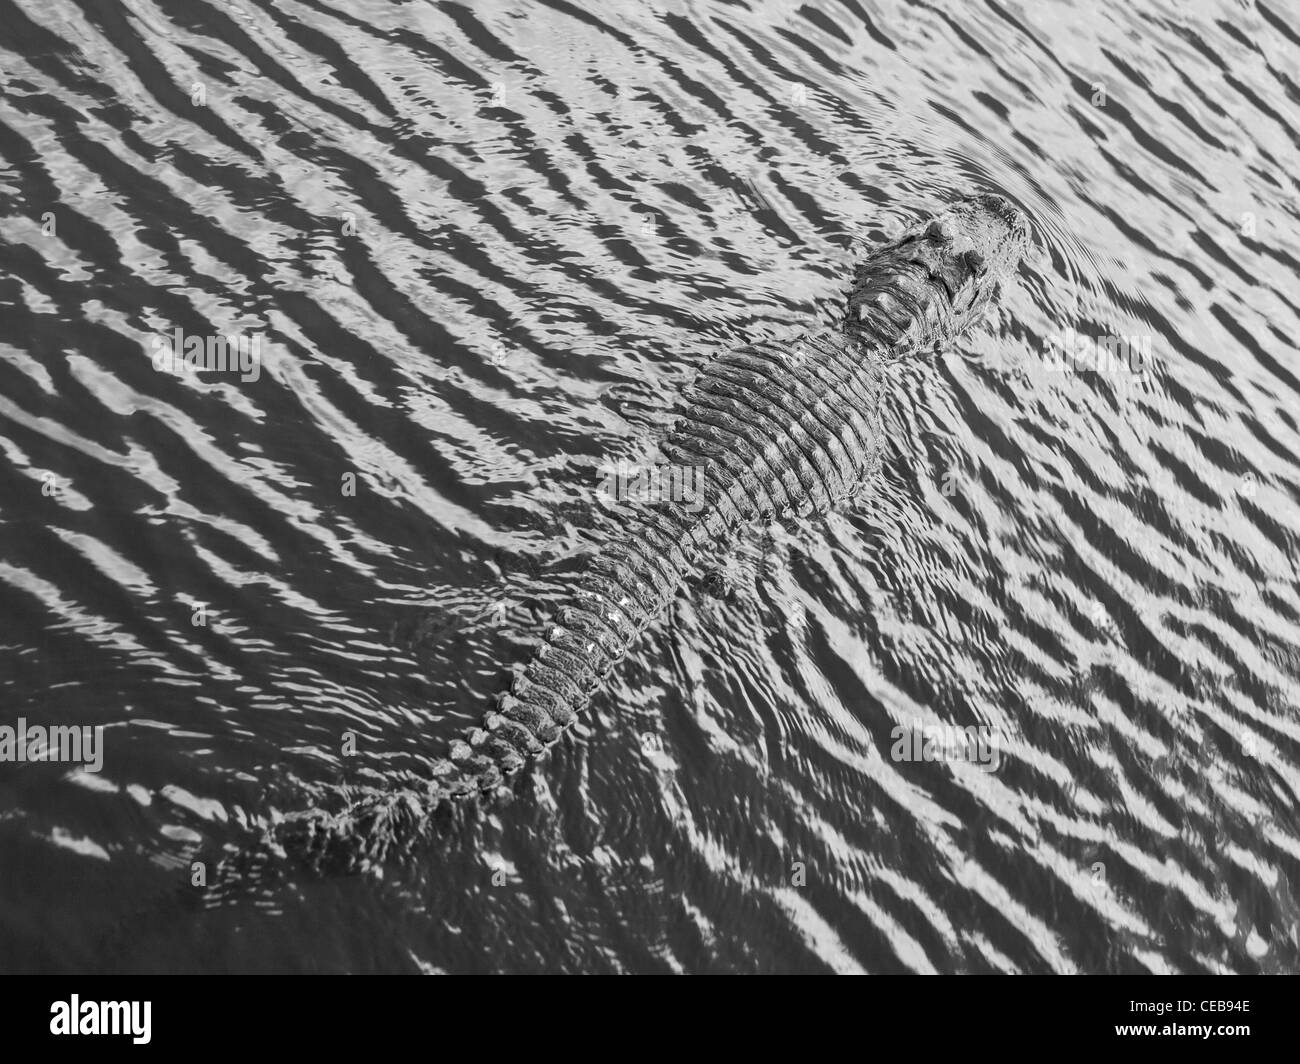 Overhead view of alligator swimming through rippled water Stock Photo